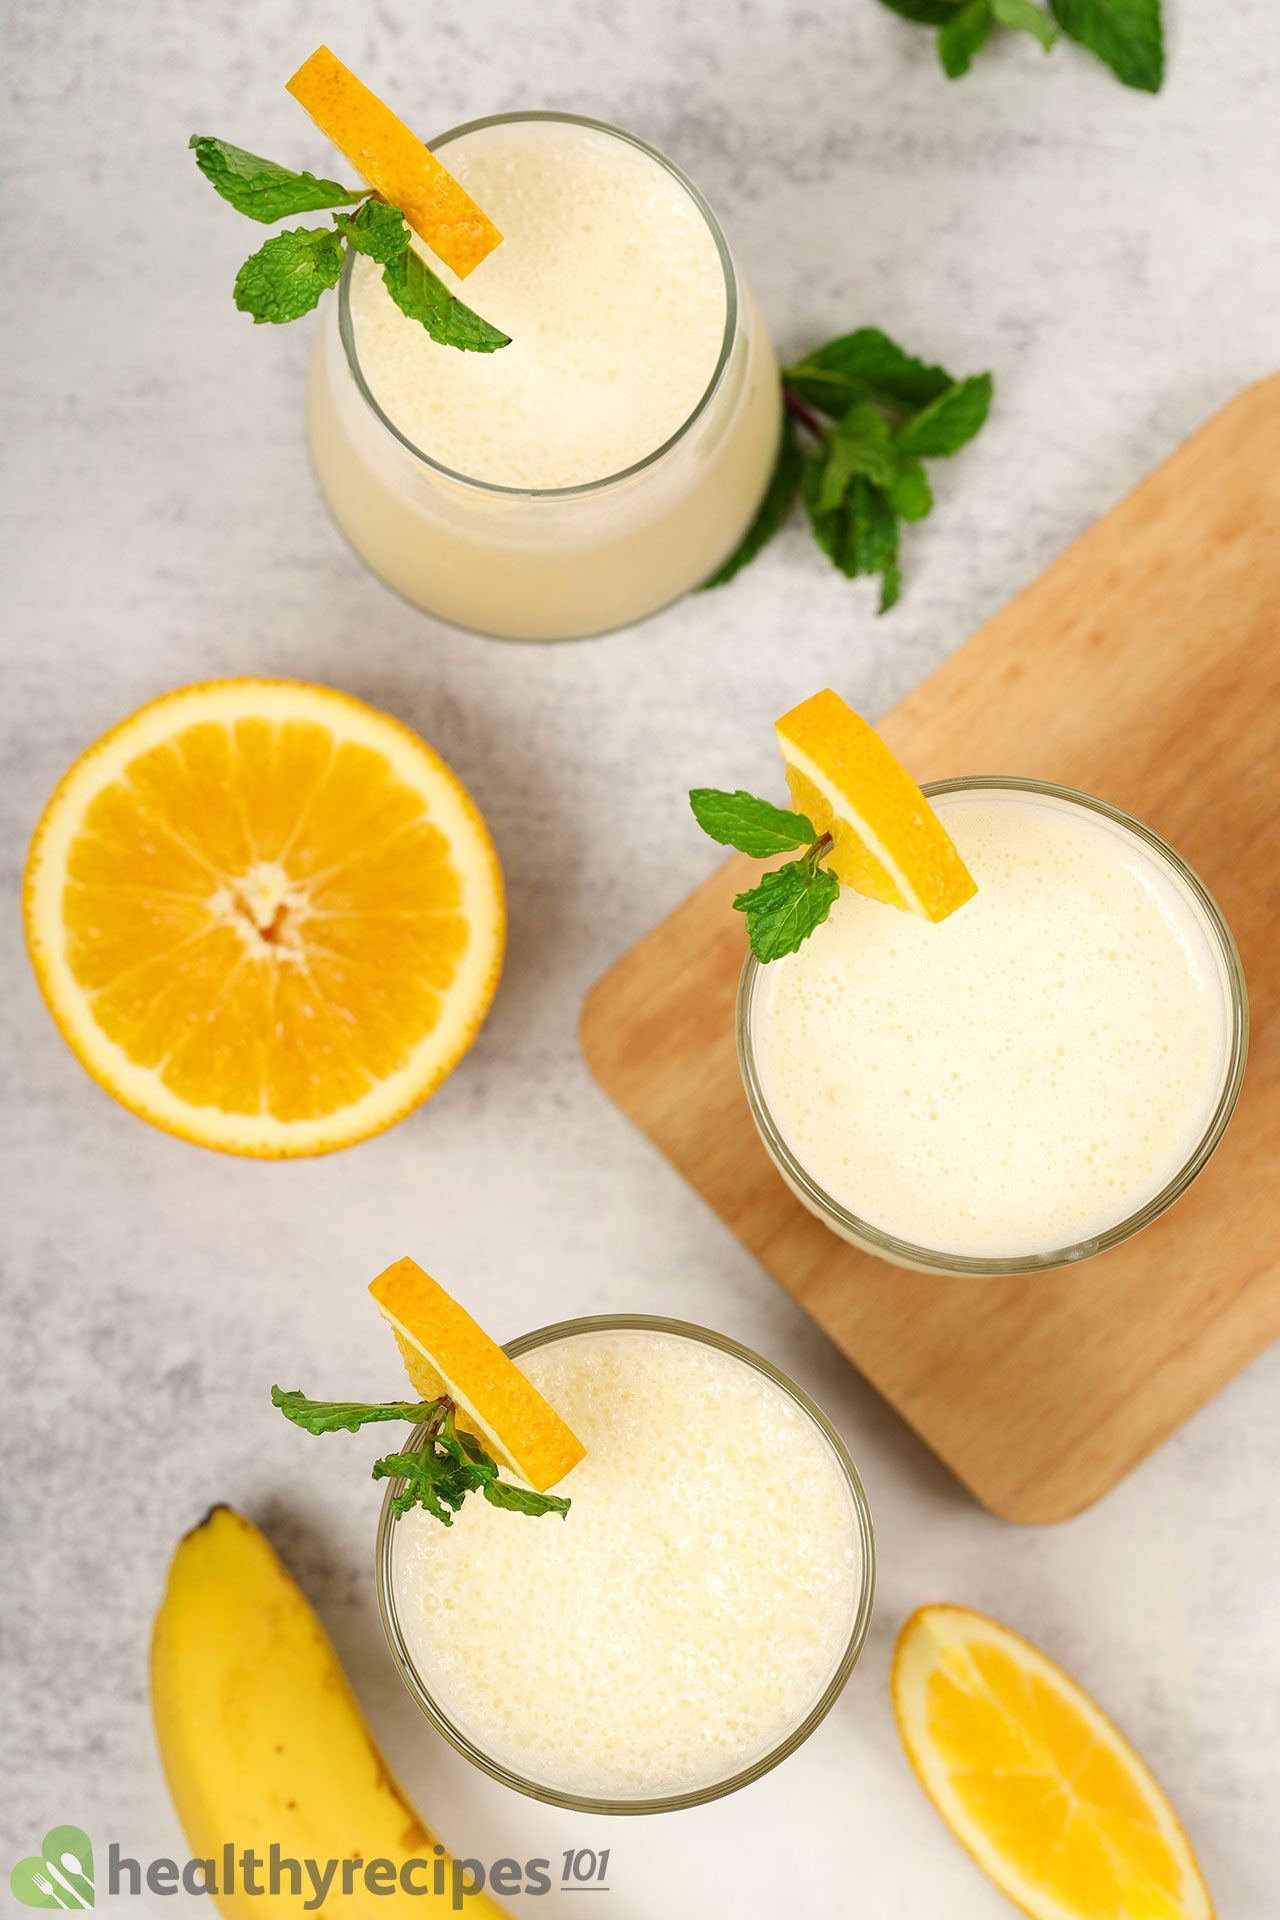 Our Orange Creamsicle Smoothie Is a Healthy Treat